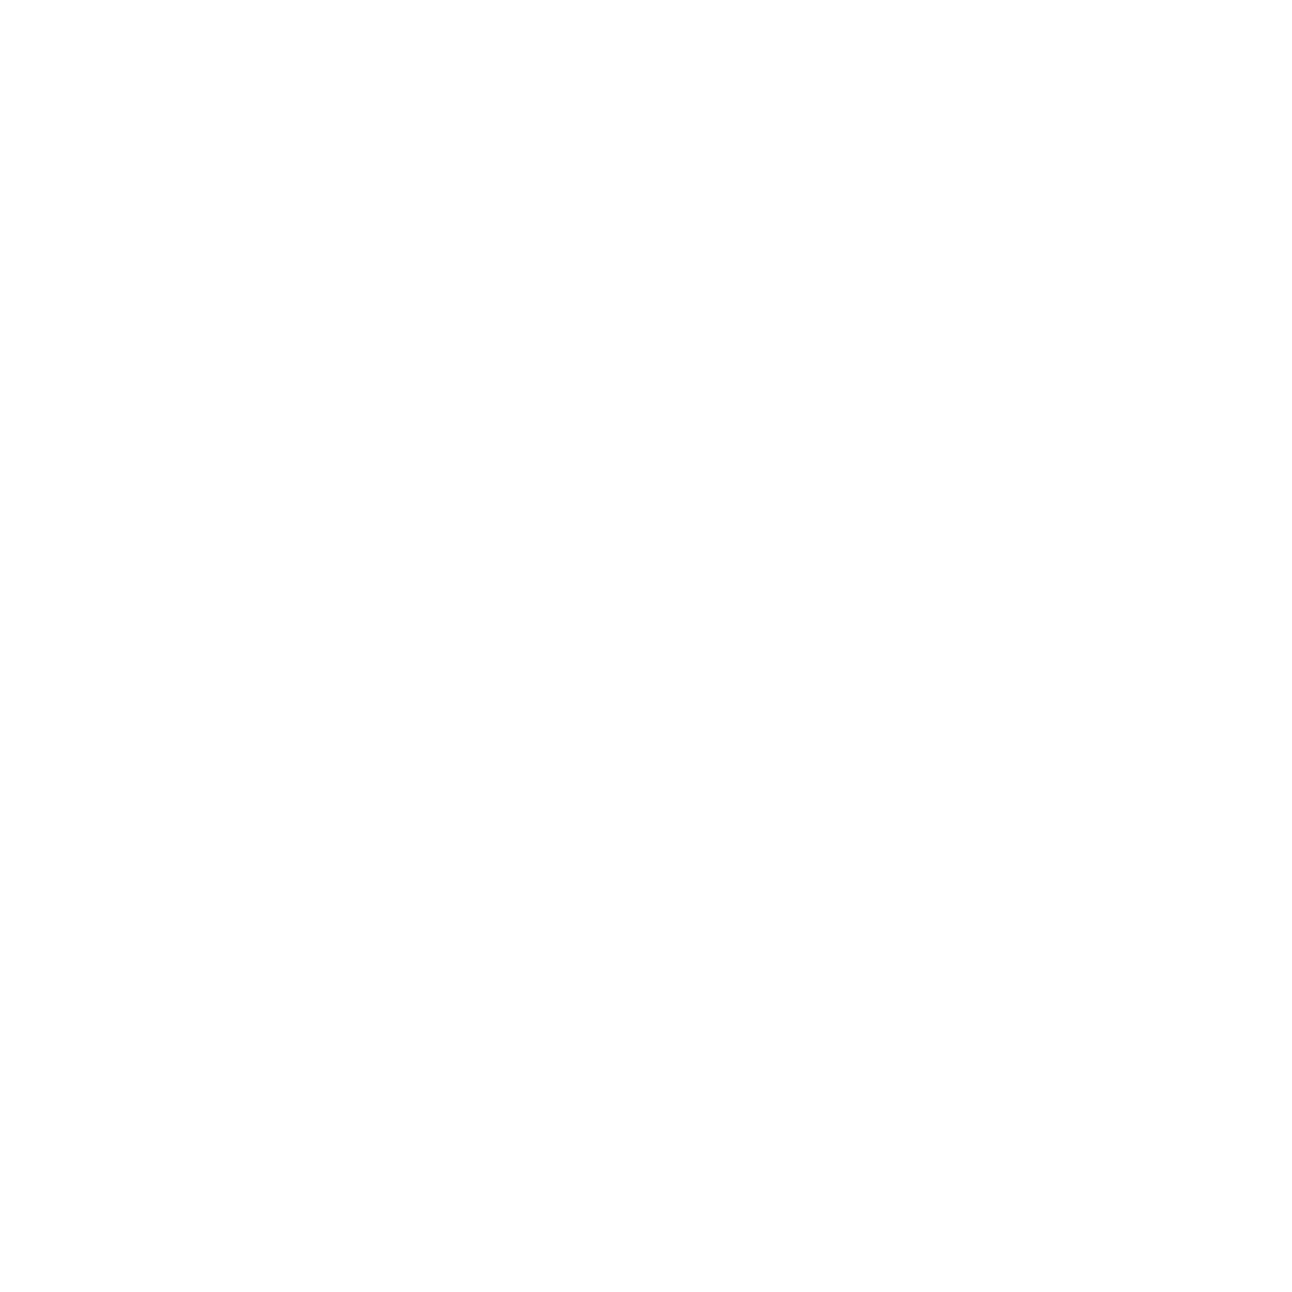 A white circle on a black background.